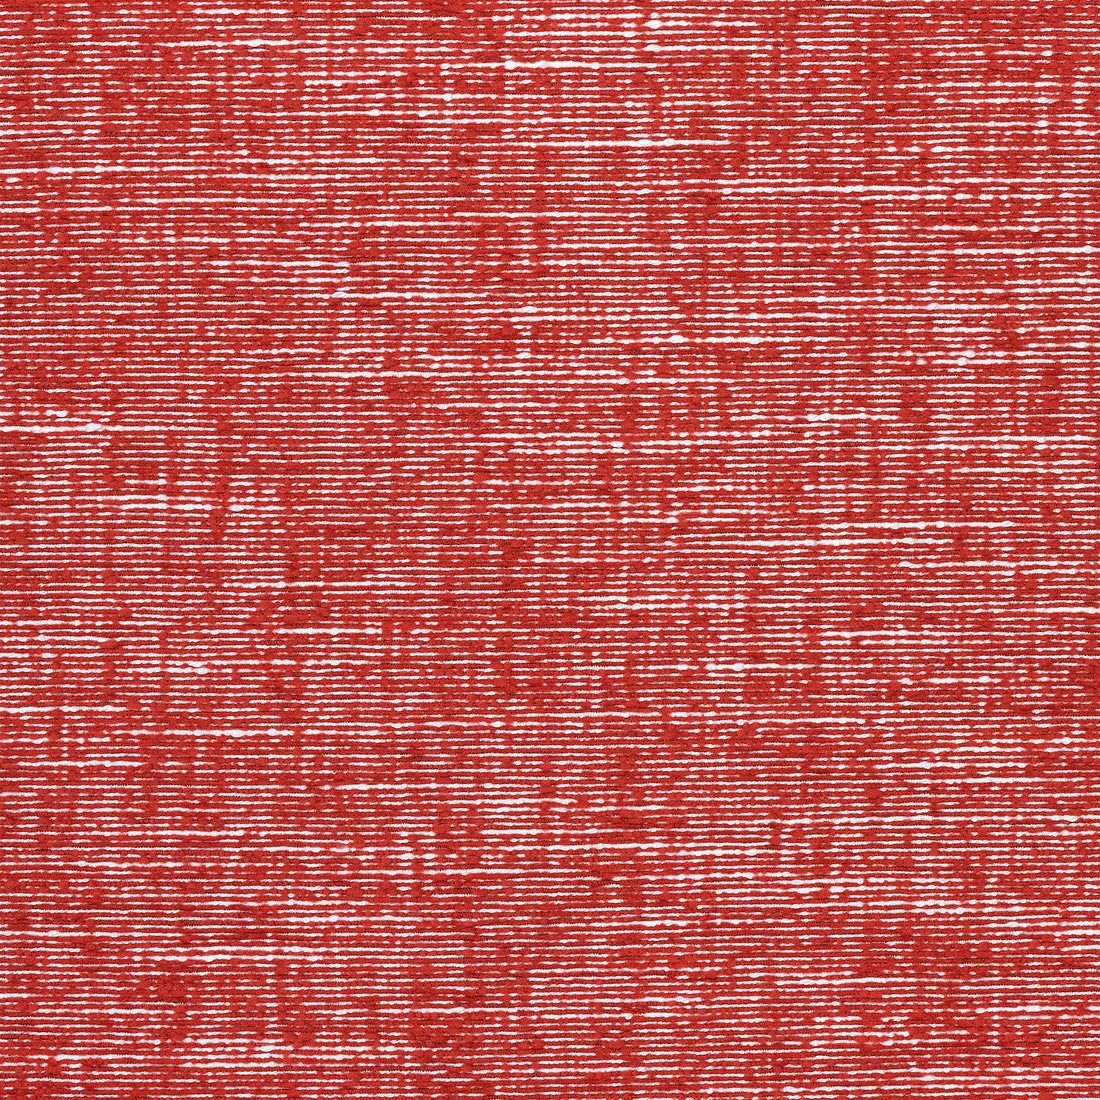 Freeport fabric in cranberry color - pattern number W74604 - by Thibaut in the Festival collection